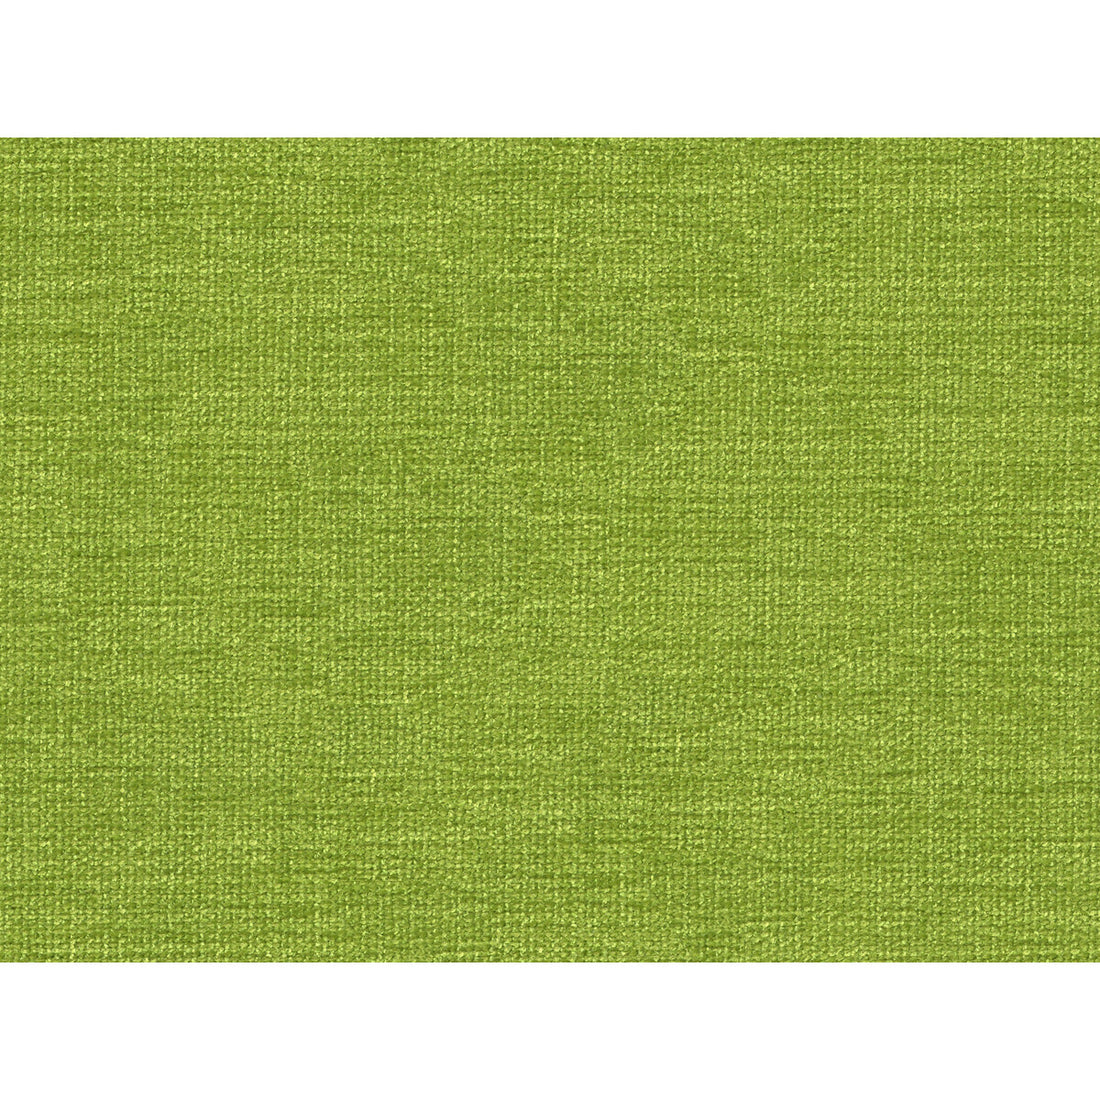 Kravet Contract fabric in 34961-3 color - pattern 34961.3.0 - by Kravet Contract in the Performance Kravetarmor collection